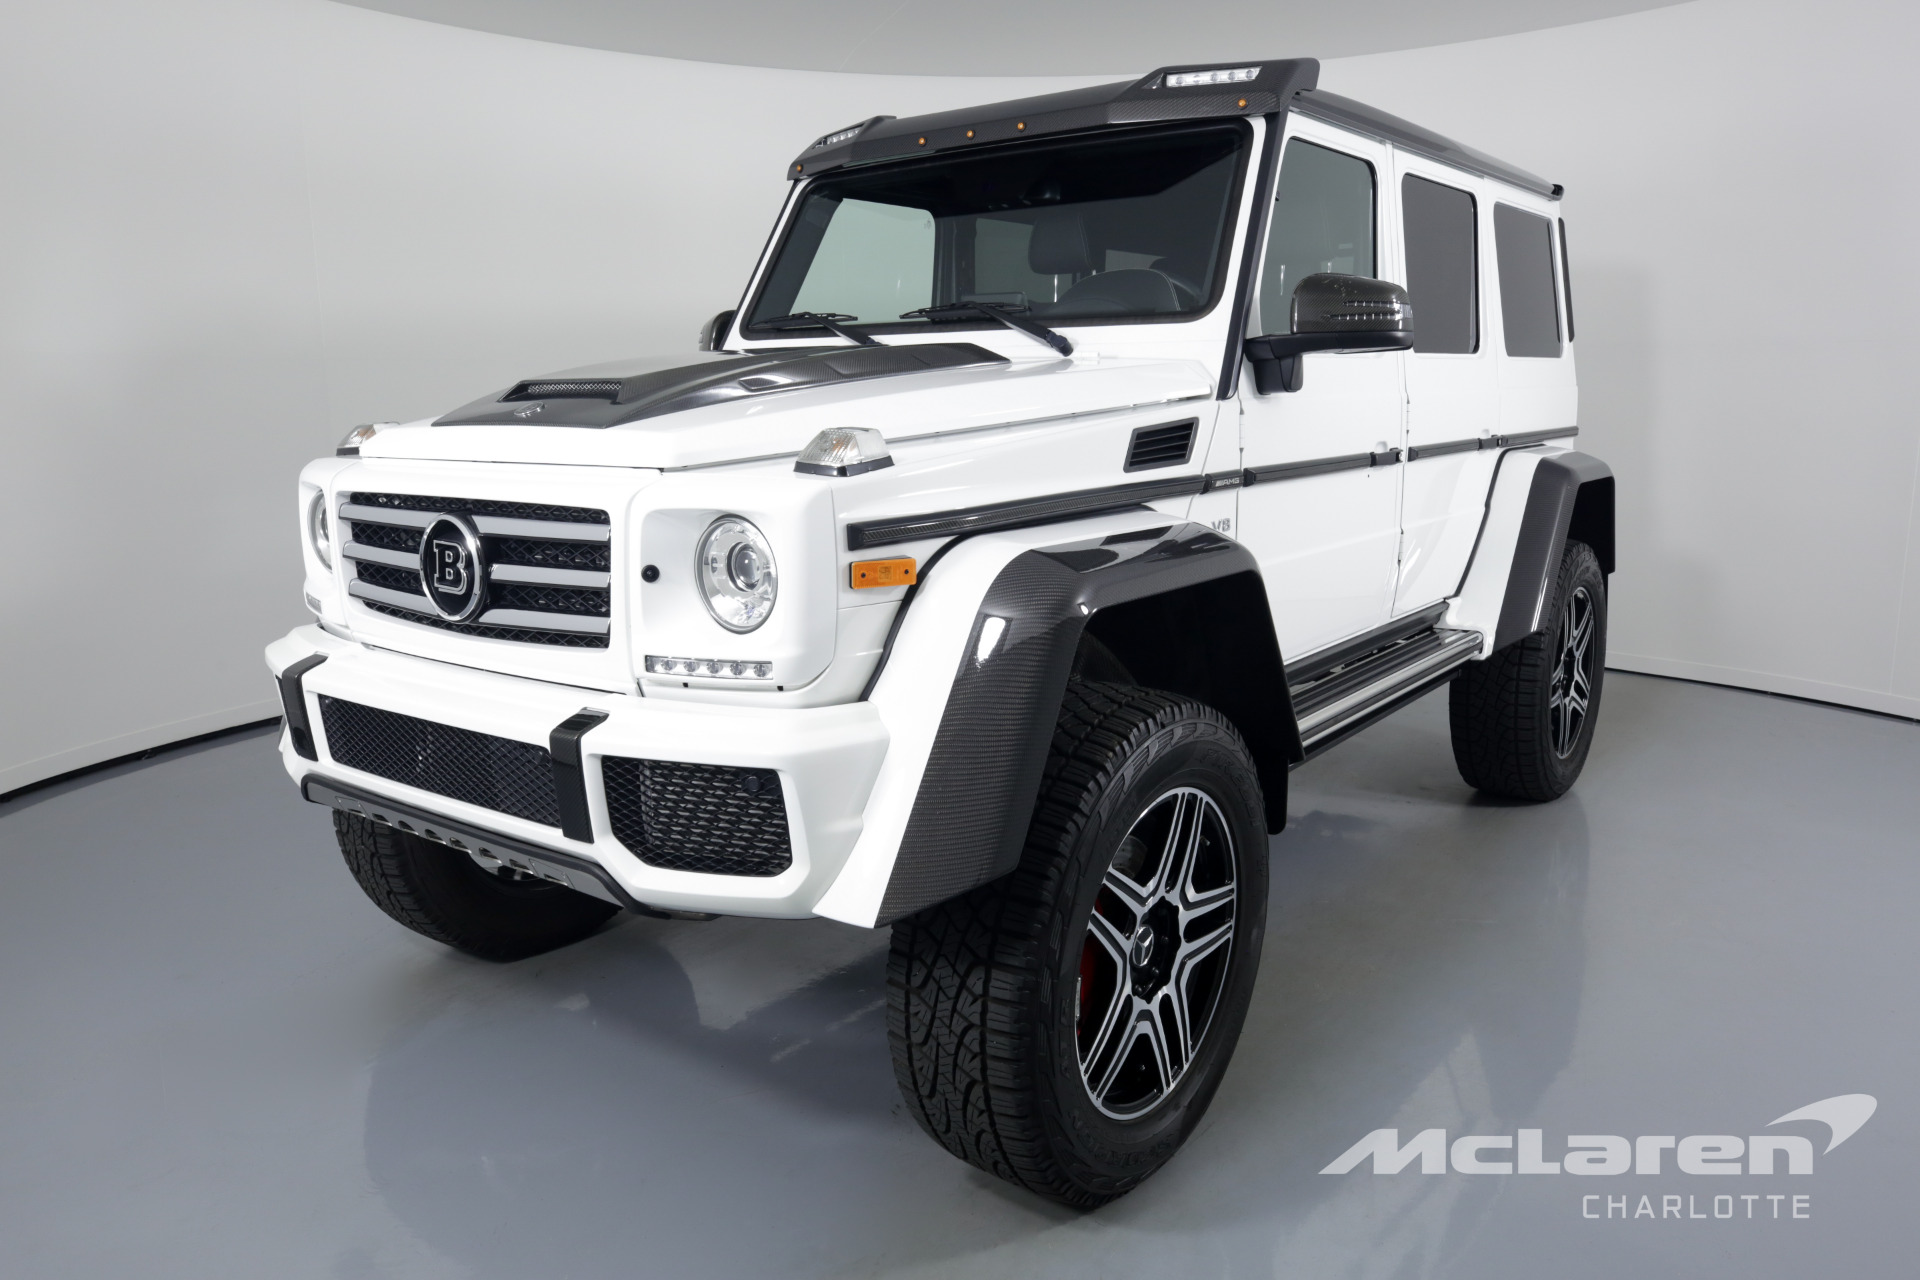 Used 18 Mercedes Benz G Class G 550 4x4 Squared For Sale Special Pricing Mclaren Charlotte Stock